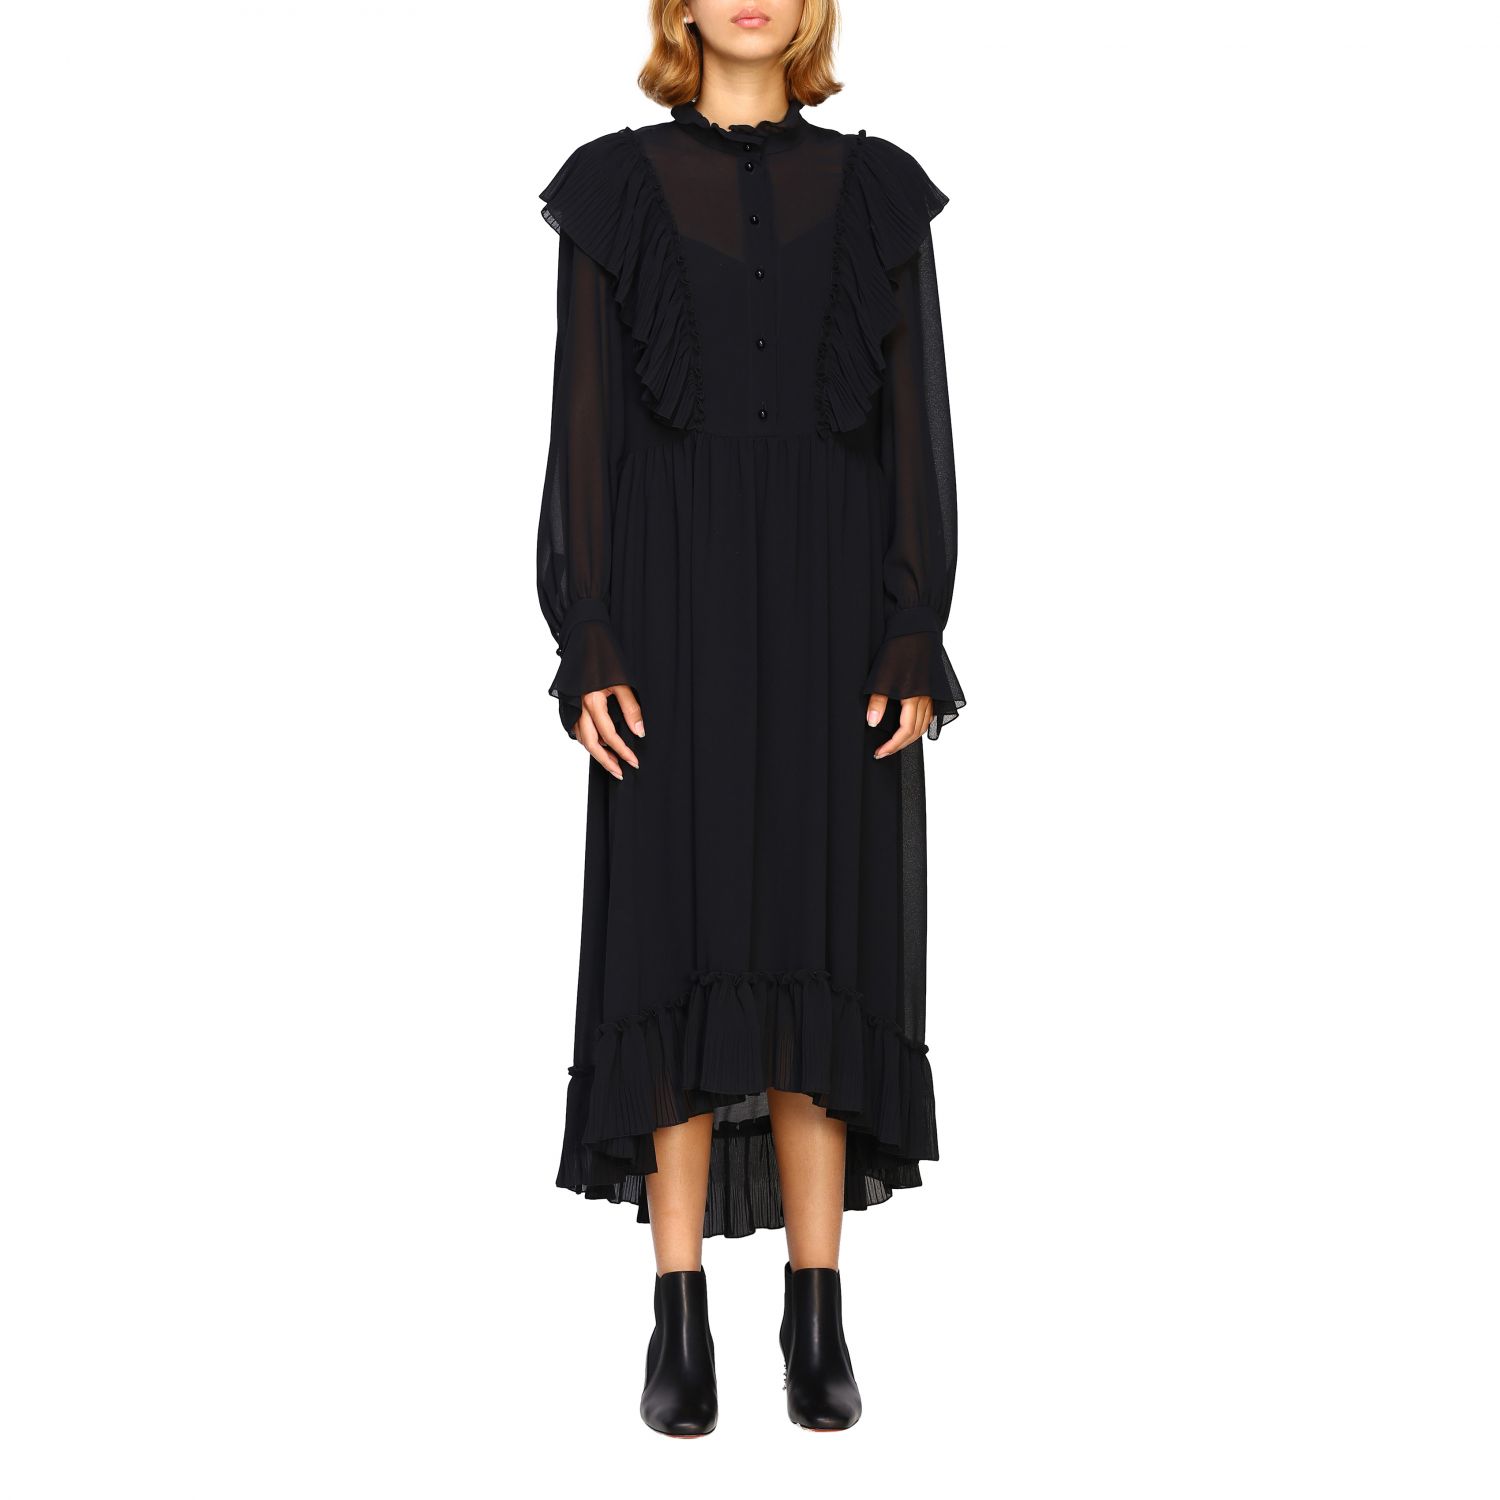 See By Chloé Outlet: dress for women - Black | See By Chloé dress ...